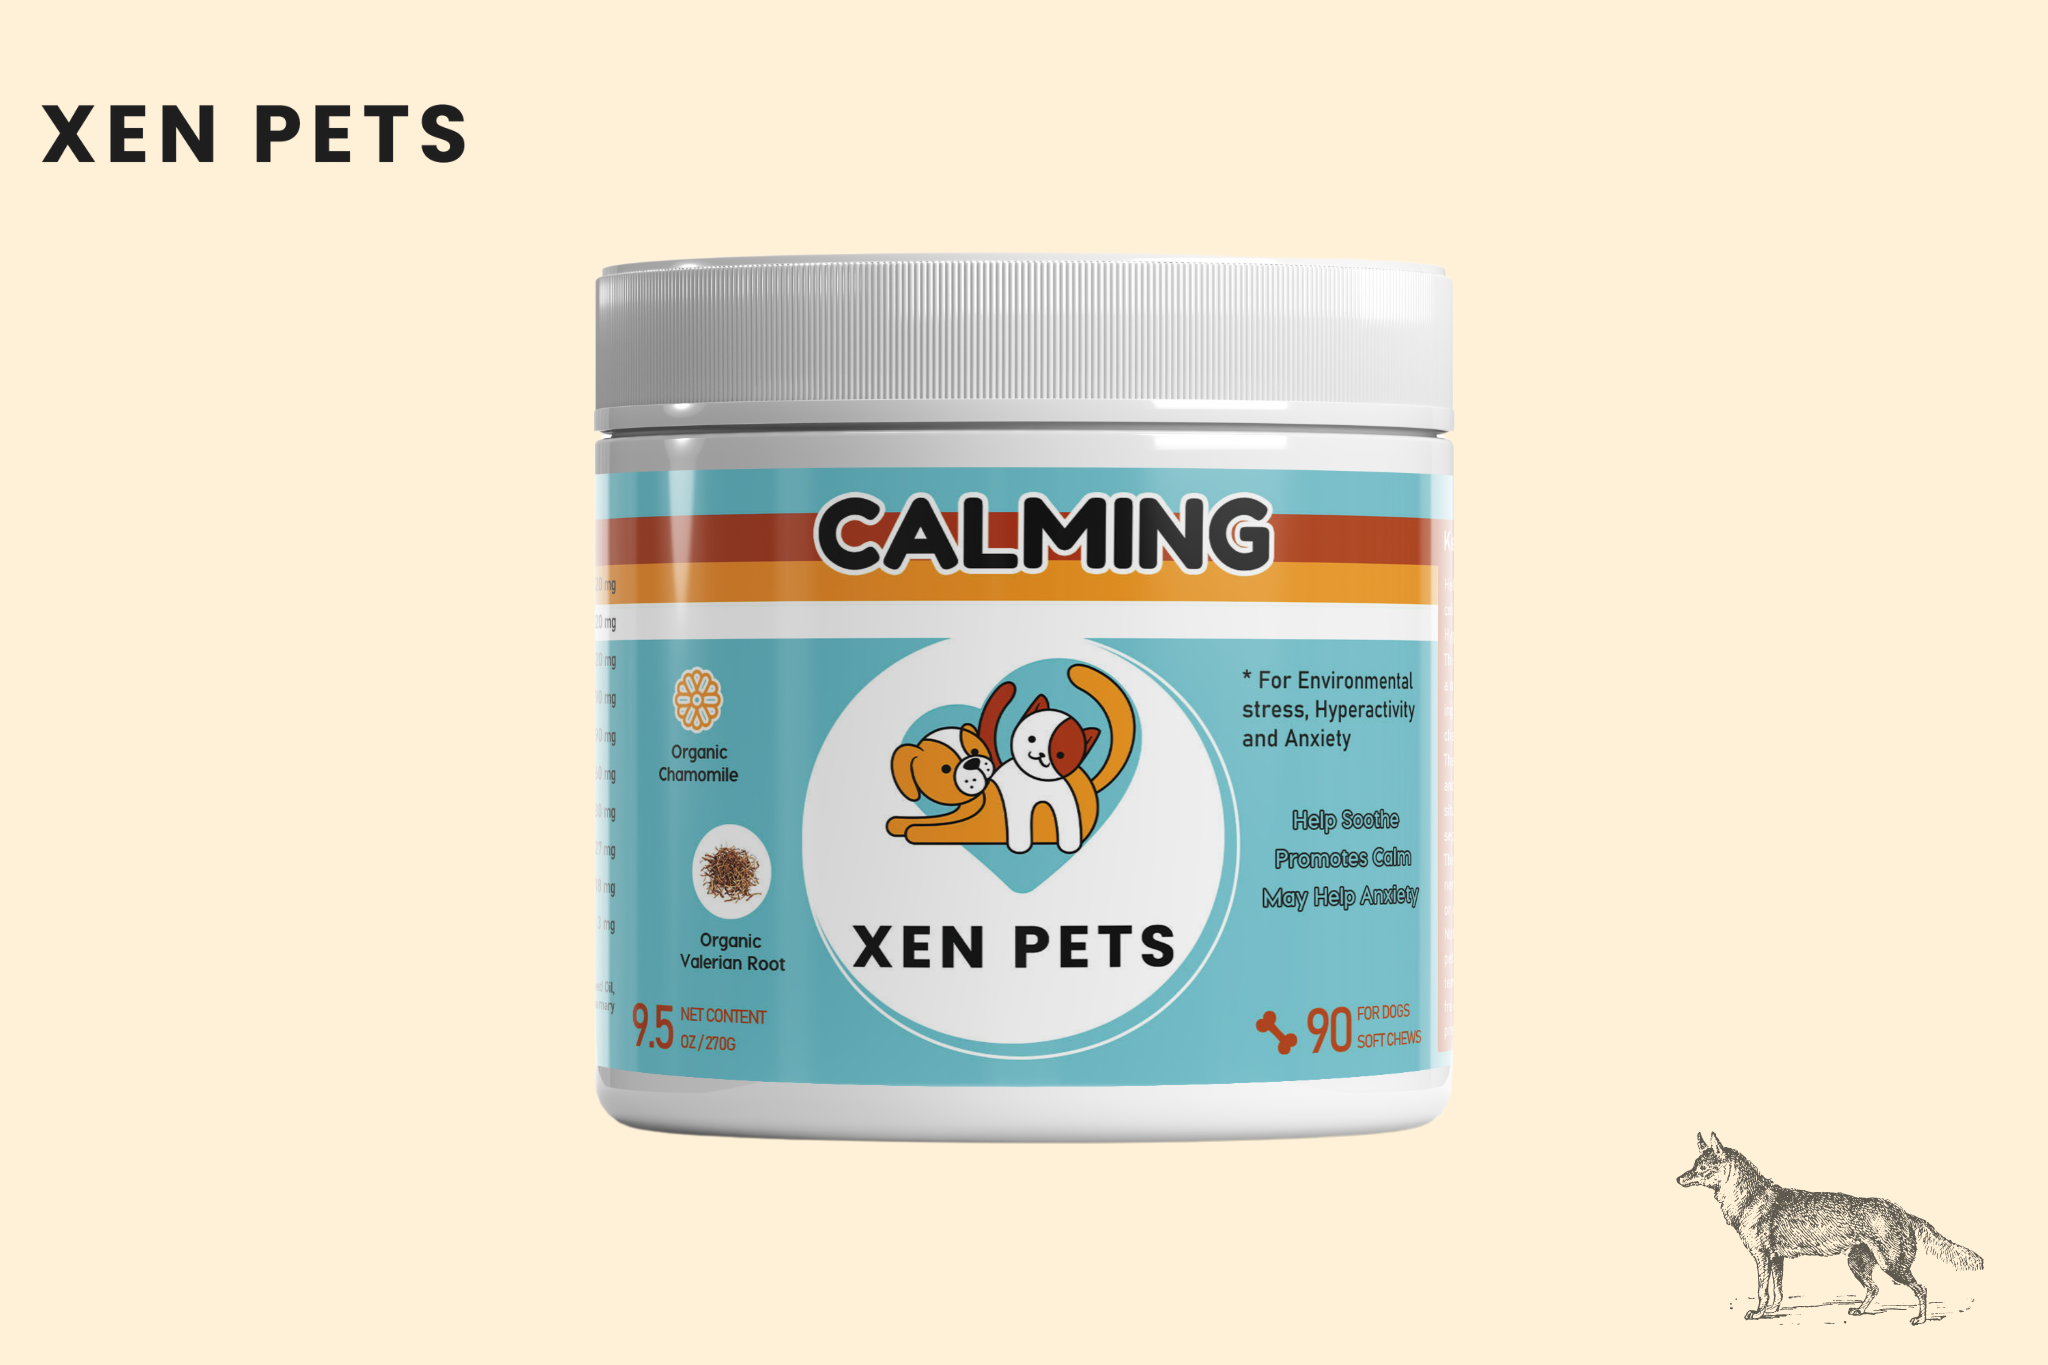 Calming Treats to help with dog's anxiety